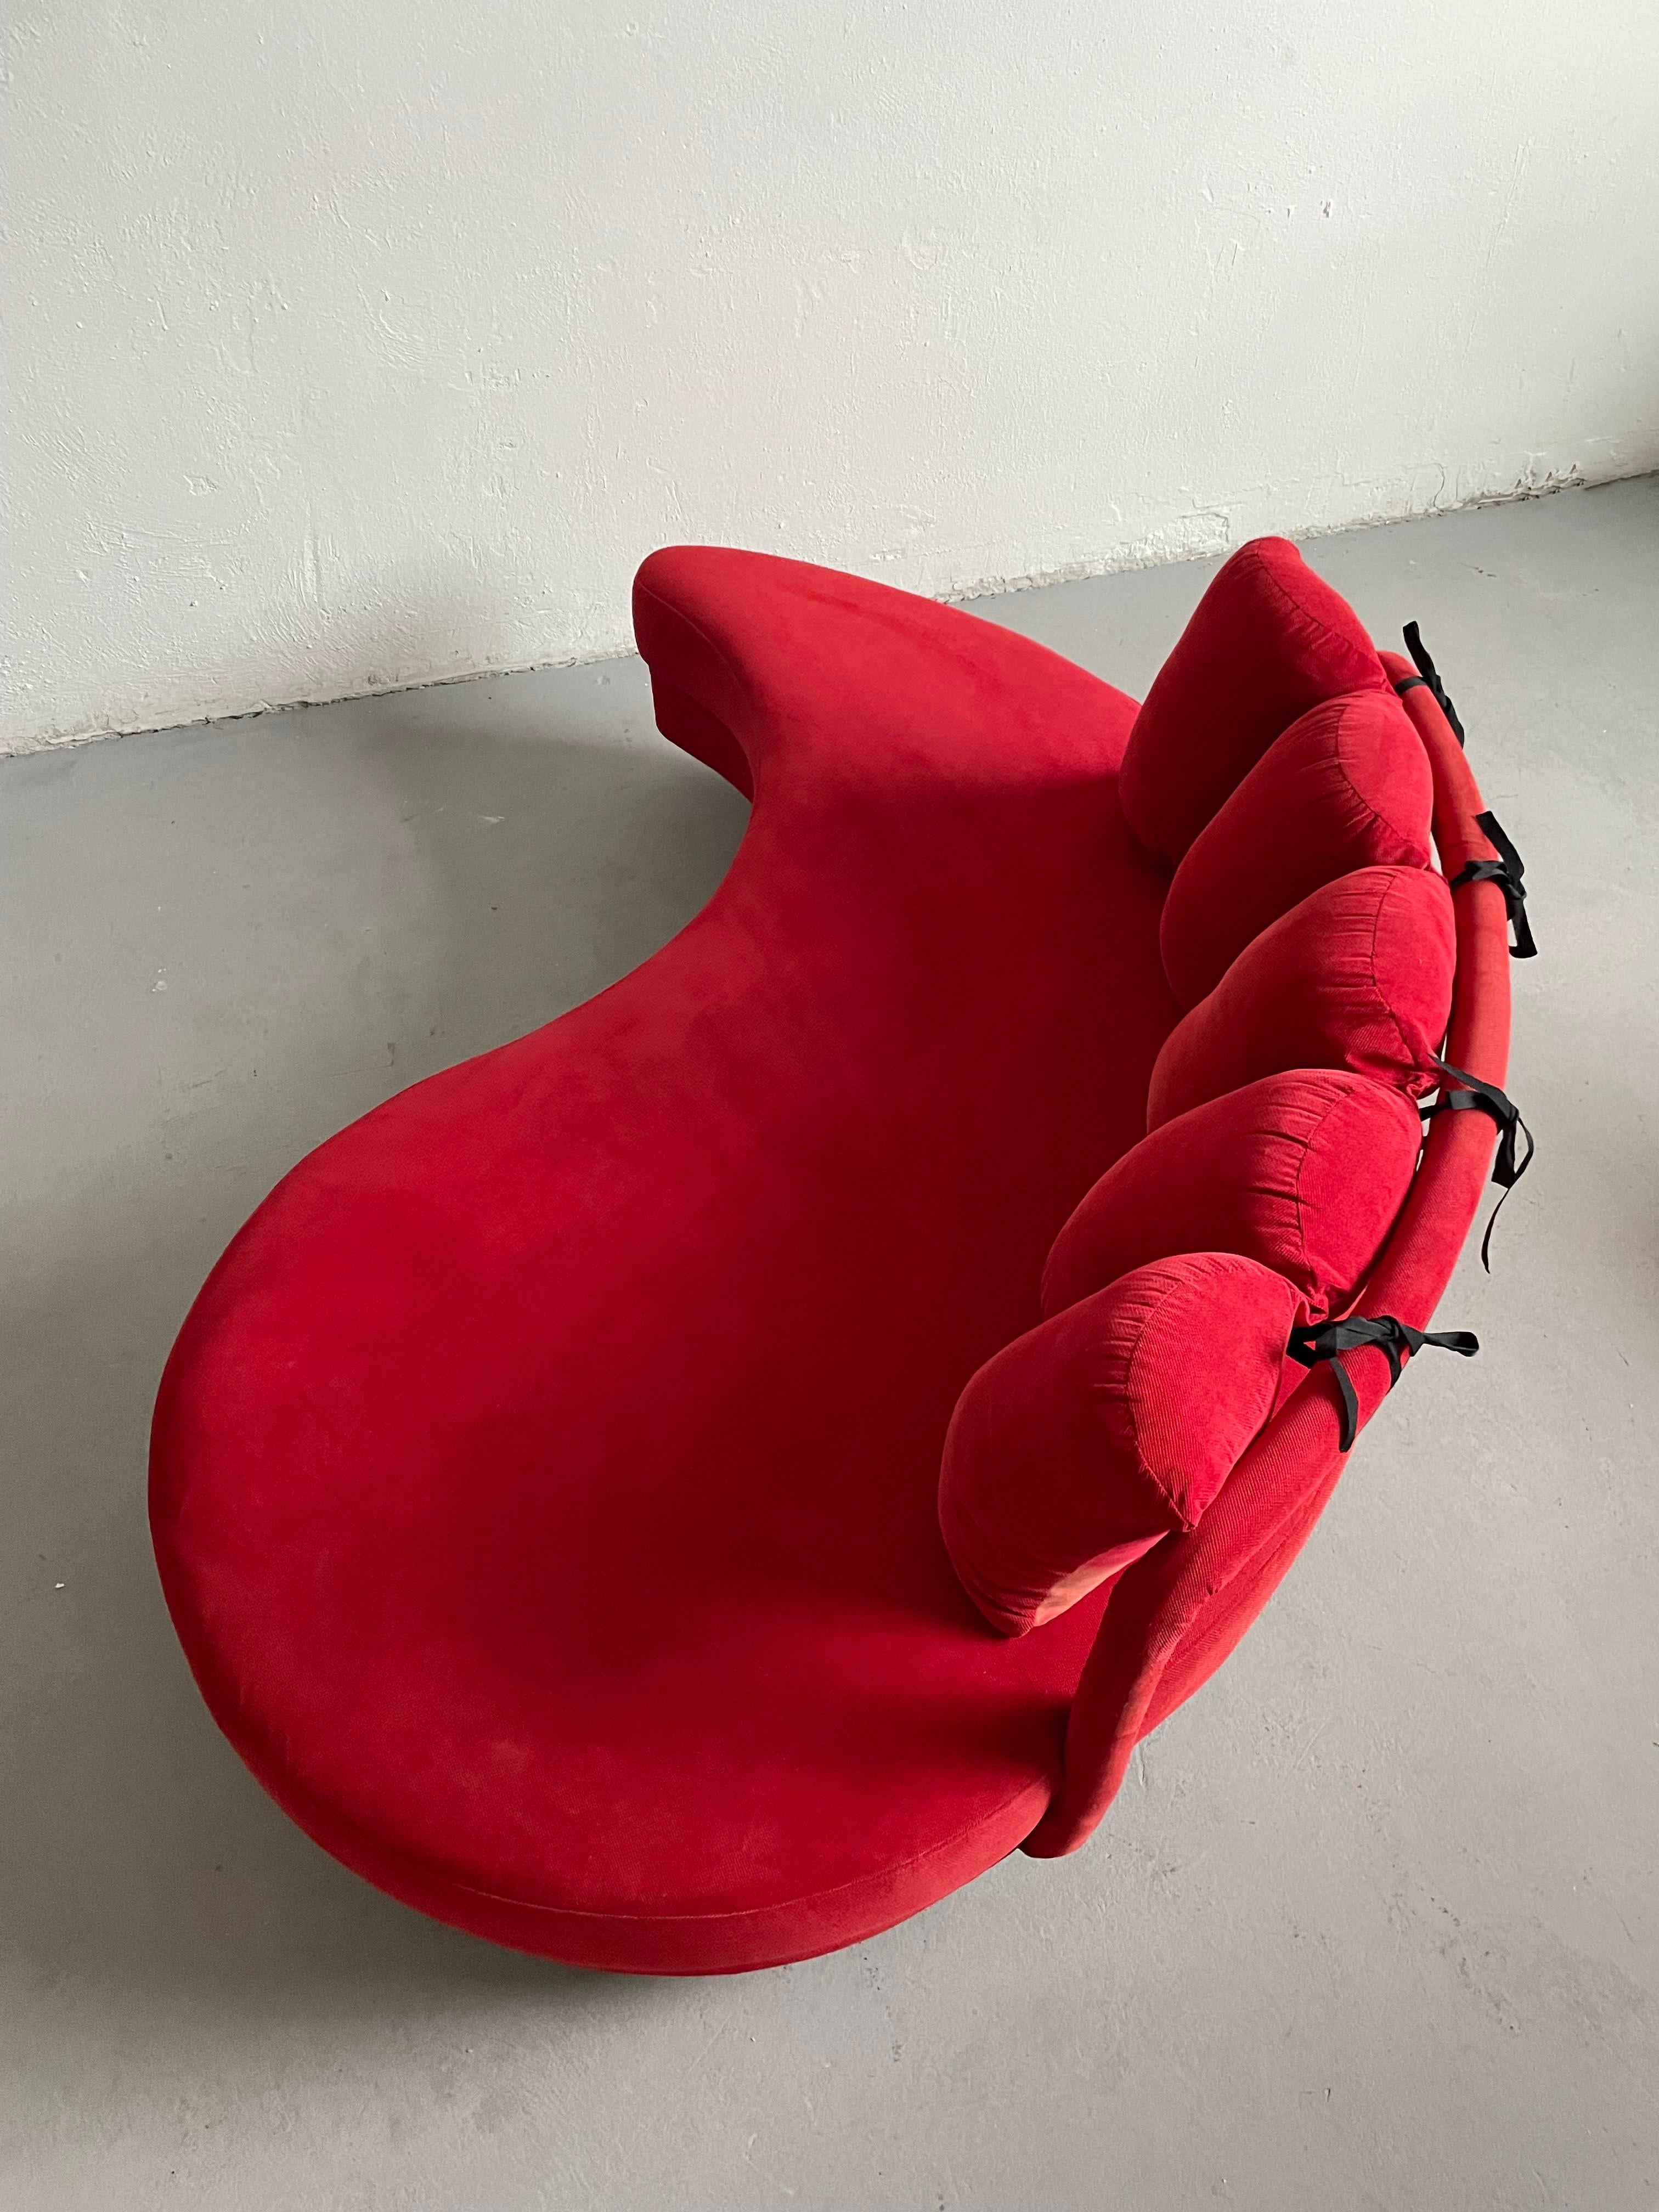 Set of 2 Postmodern Curved Yin-Yang Shaped Sofa Daybeds in Red Fabric, c 1980s For Sale 6